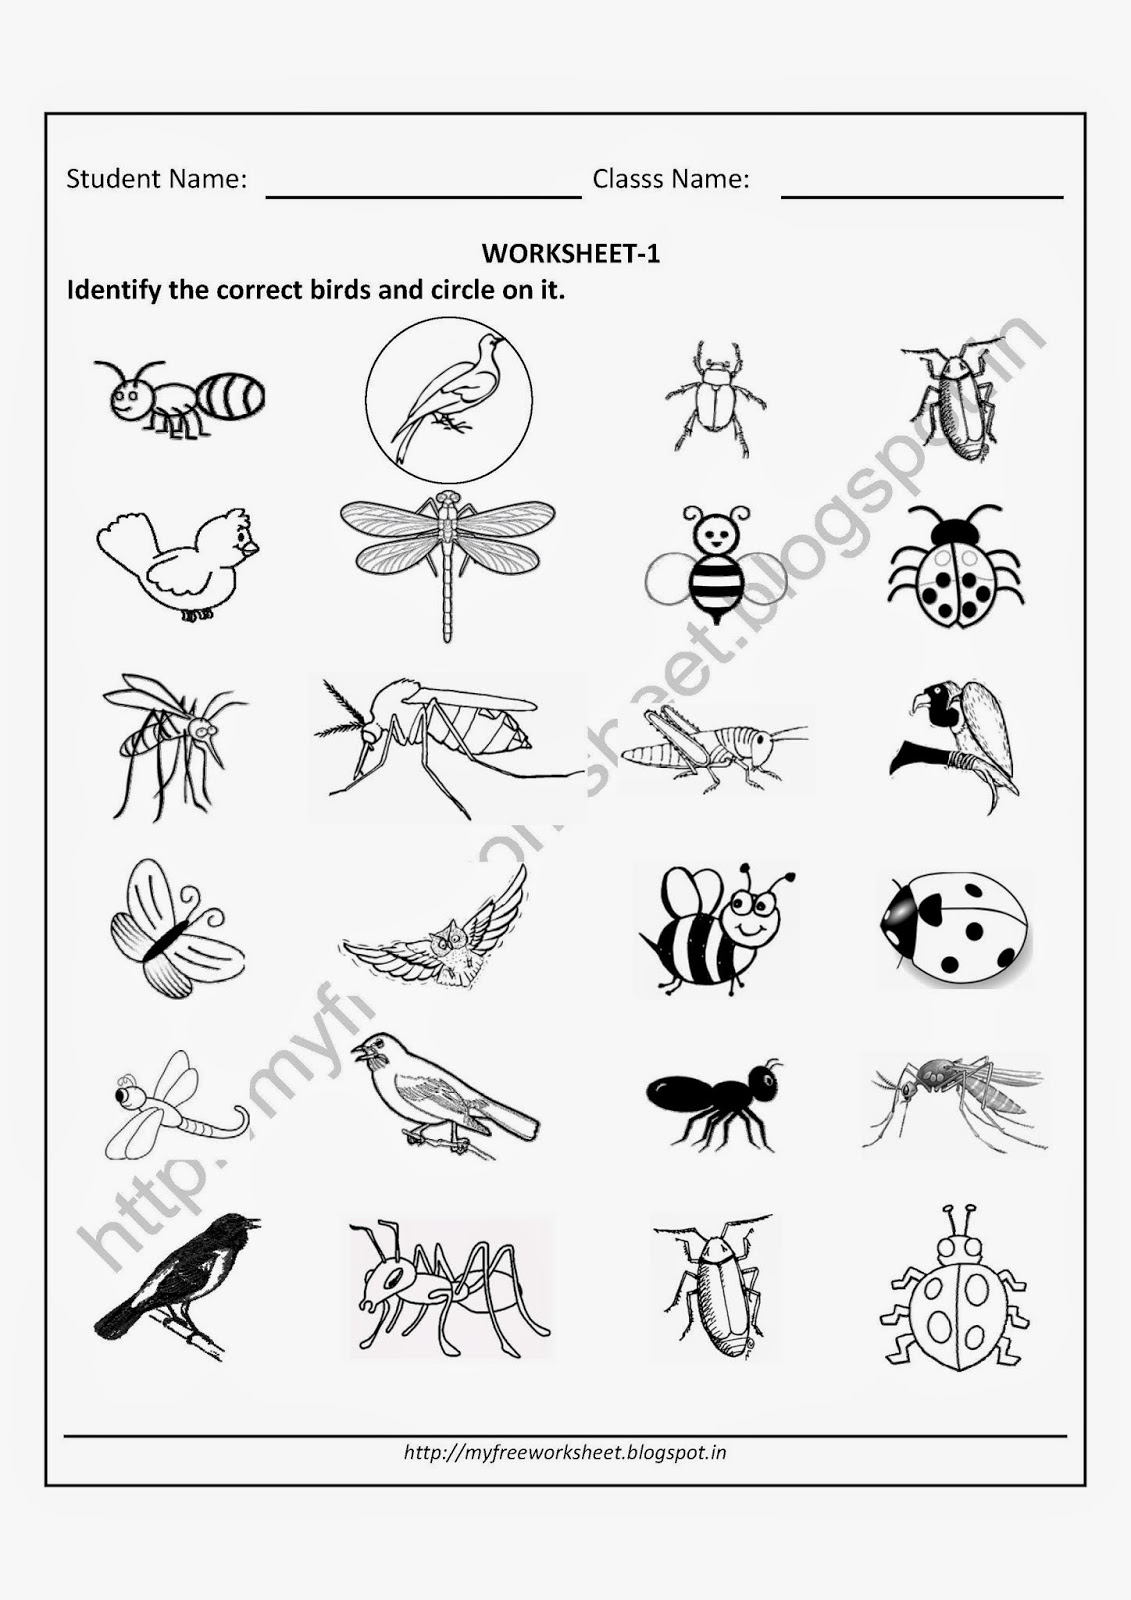 Just click it and downlaod Free Printable worksheets for Nursery